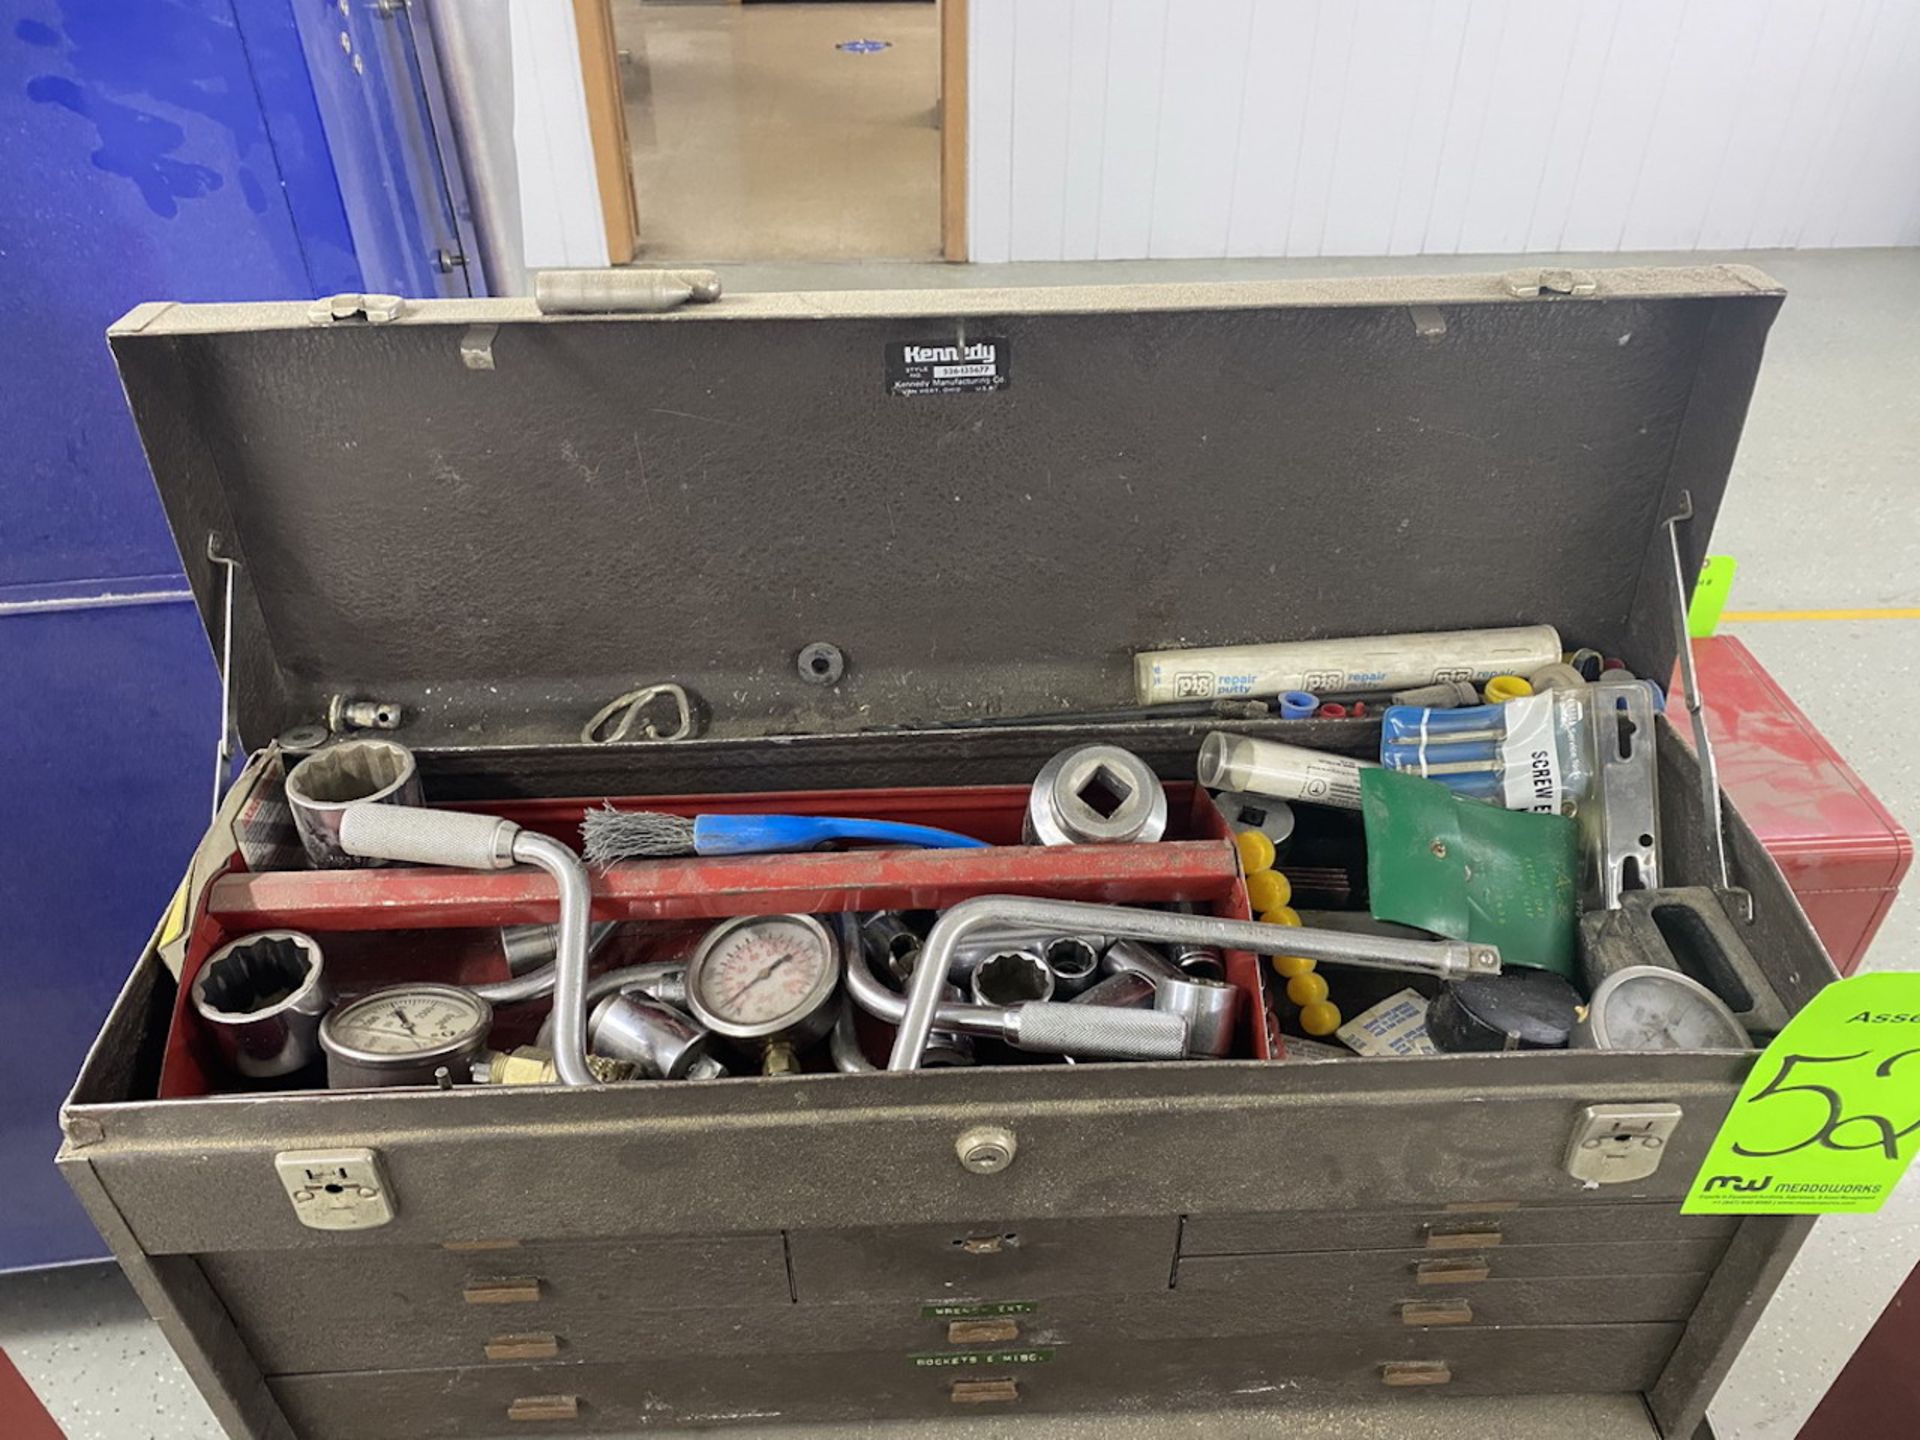 Kennedy 27" x 18" Tool Box Including Assorted Hand Tools, Wrenches, Screwdrivers and Hex Keys - Image 3 of 11